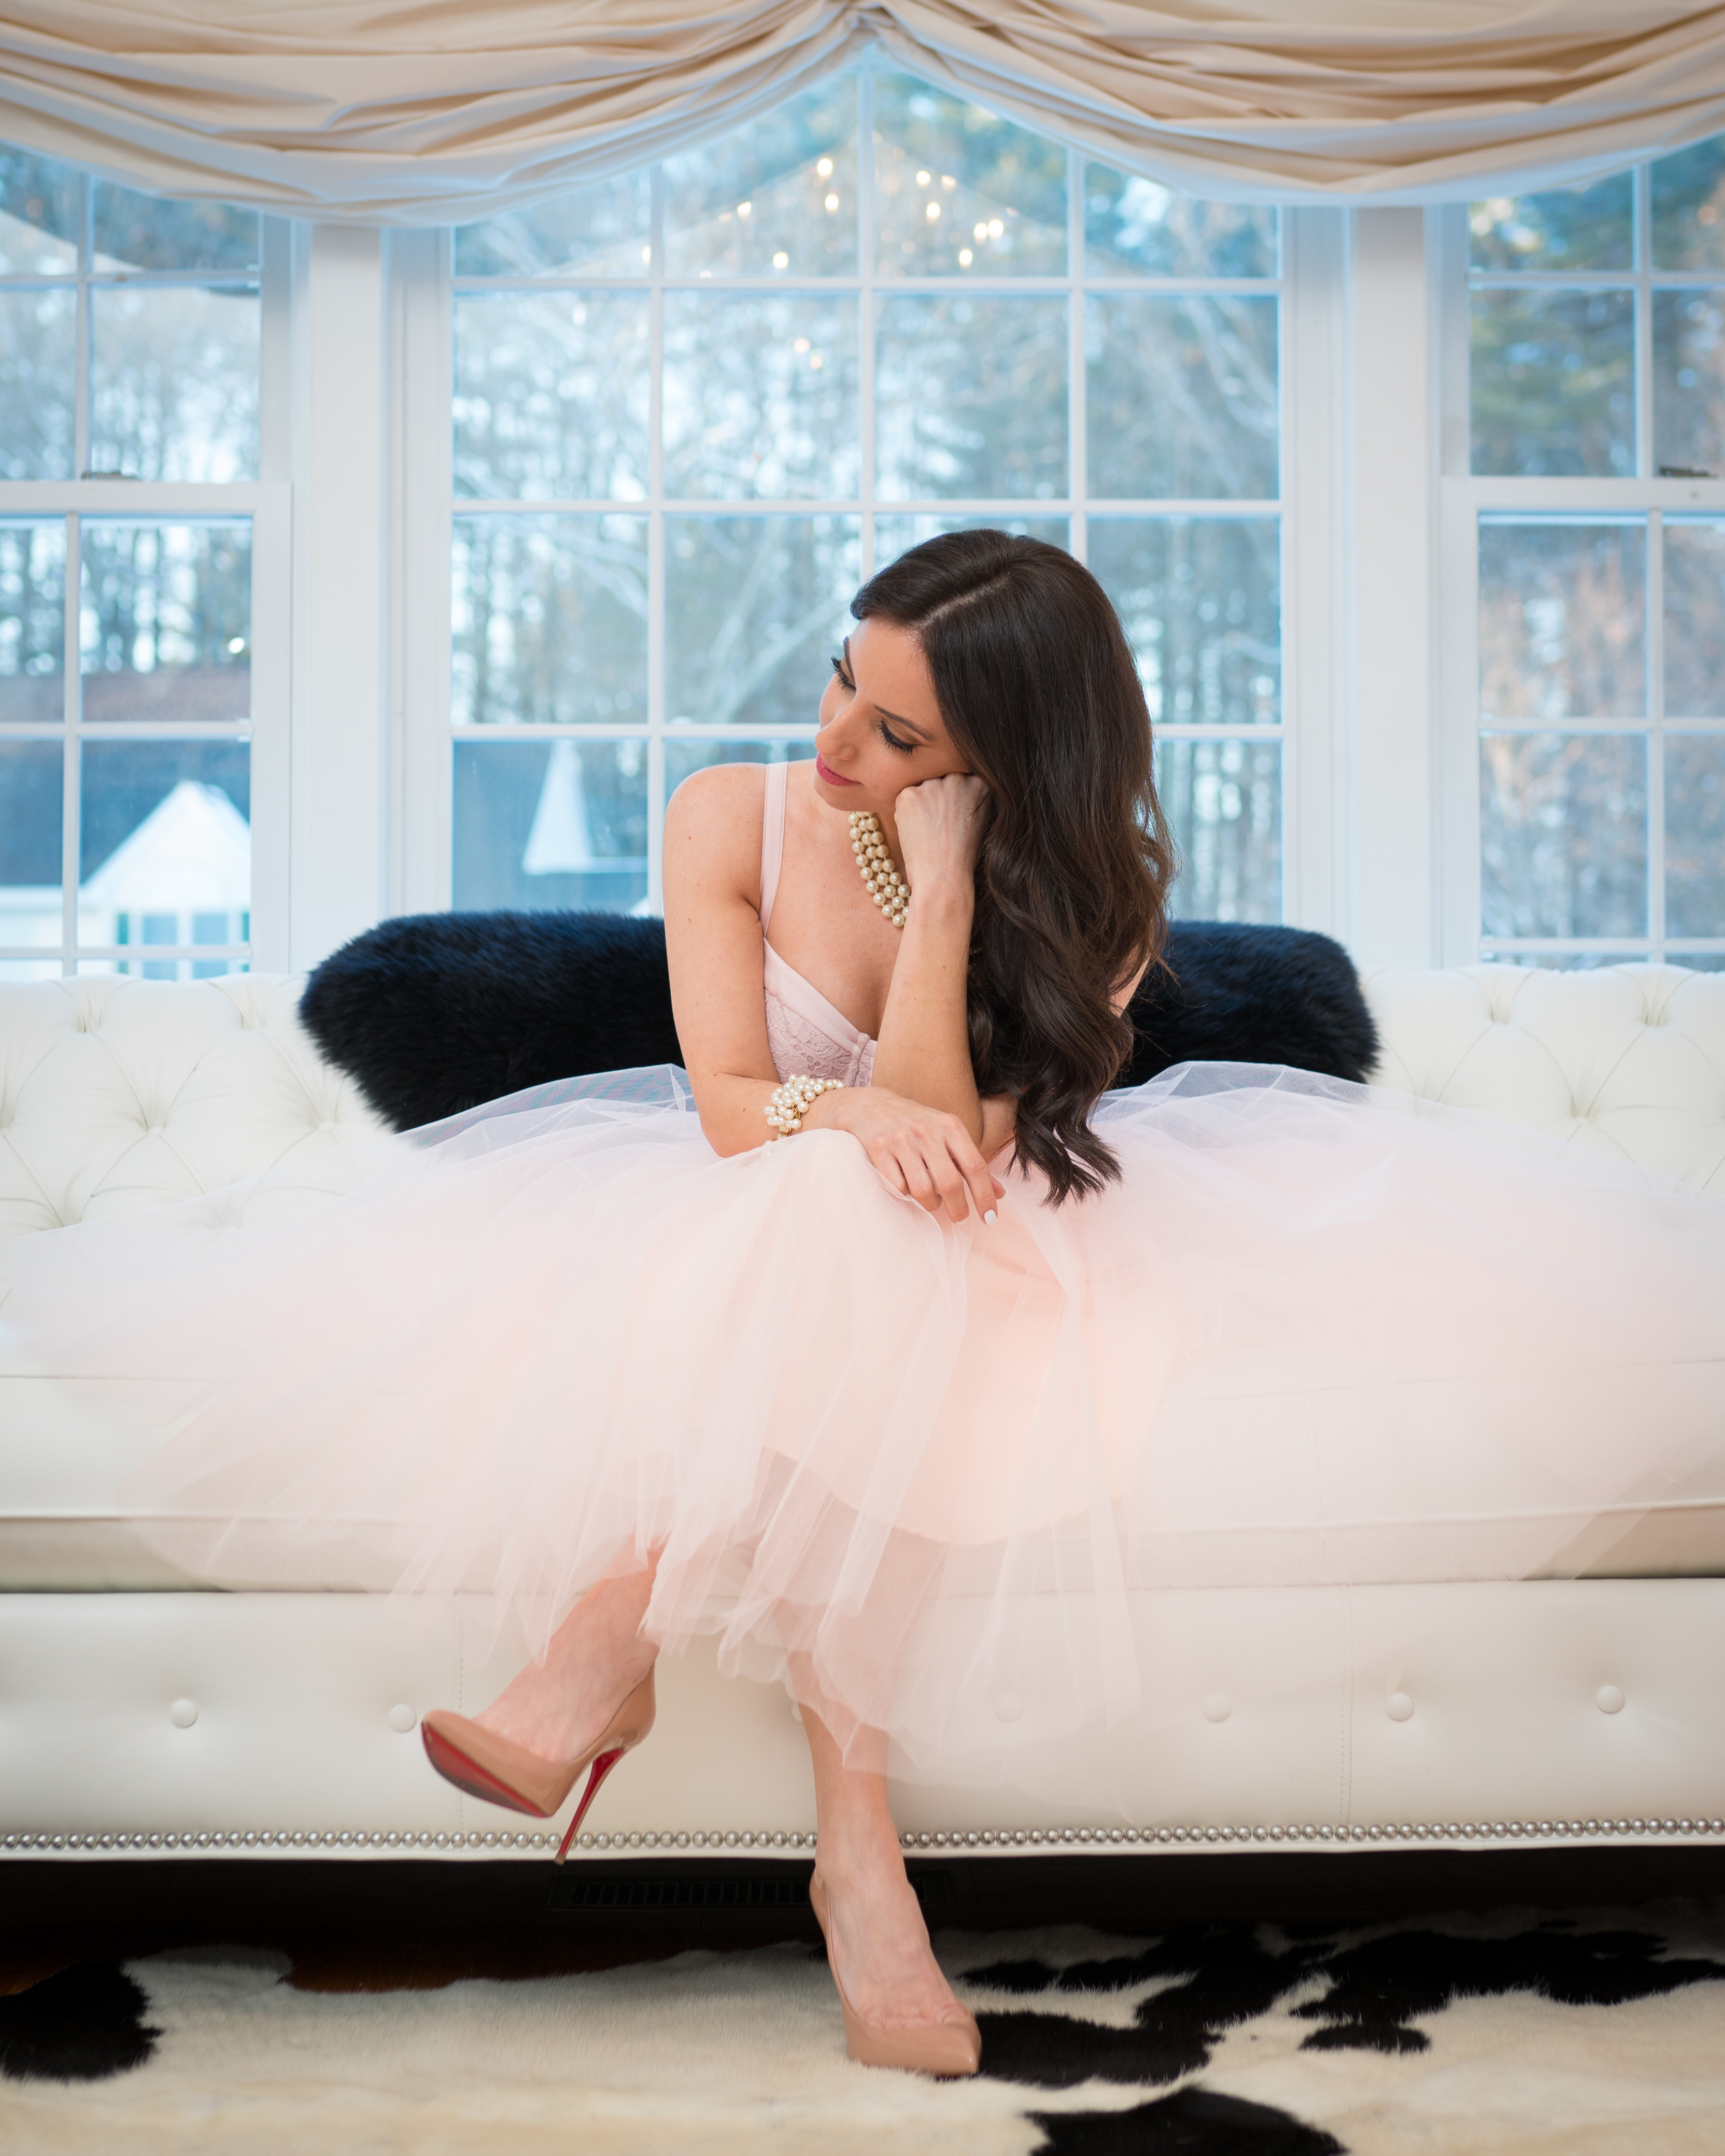 Bloomingdale's #1 - The Tutu Project